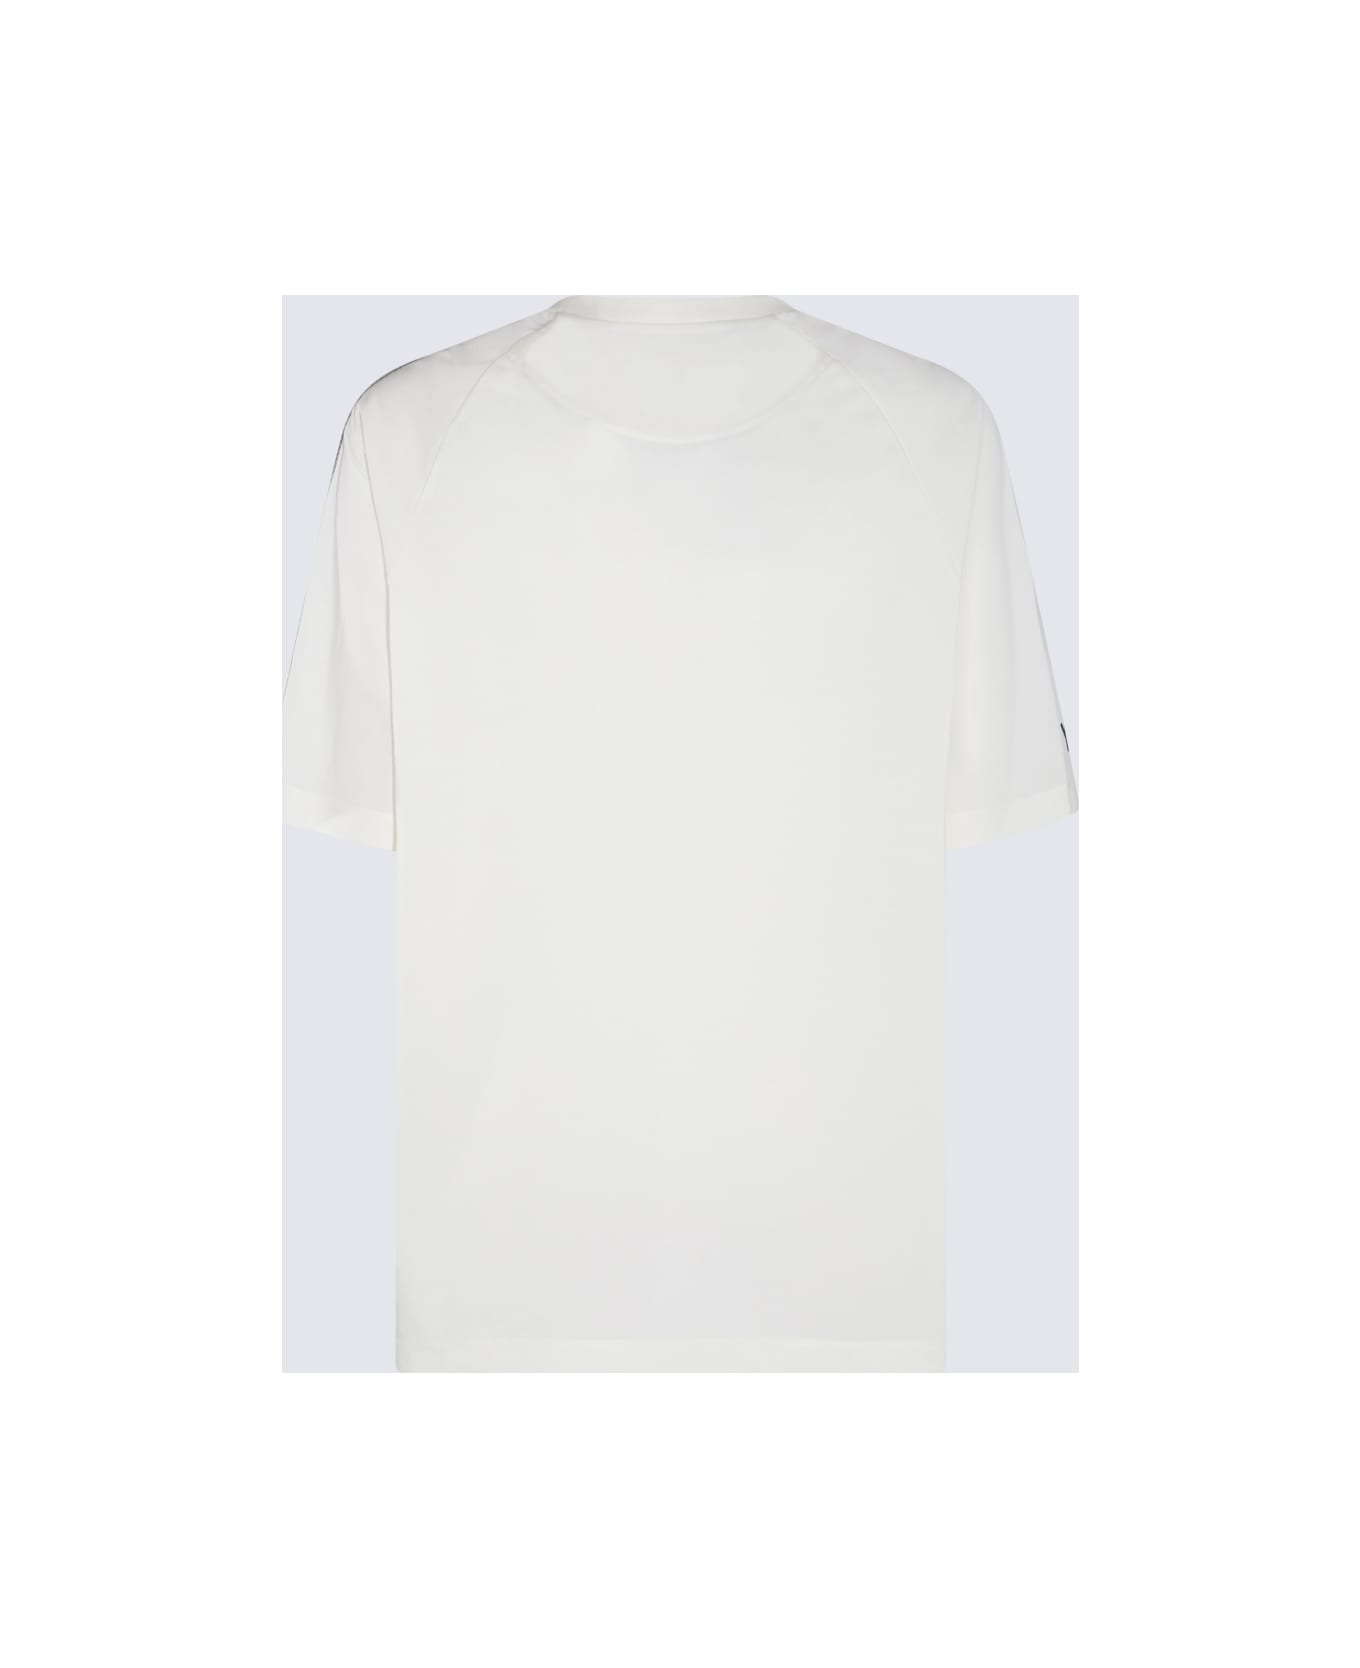 Y-3 White And Grey Cotton T-shirt - Beige